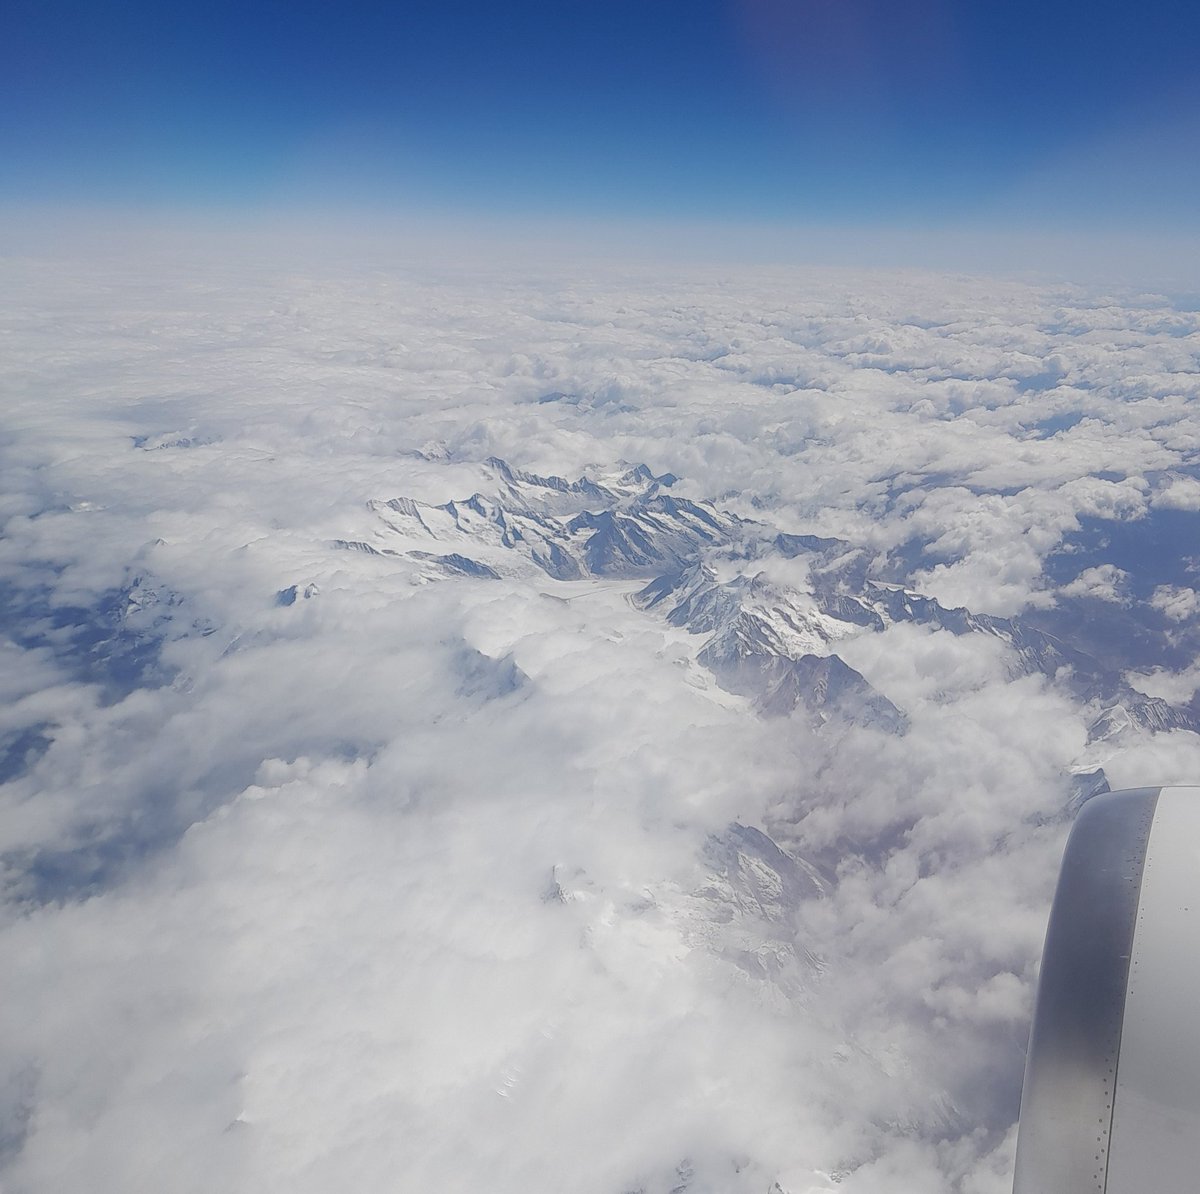 #Tweet  very little snow on the Alps.
Right side, in the center, Matterhorn followed by Dufourspitze/Monte Rosa. On the left, Aletschgletscher, clouds passing over the Eiger.